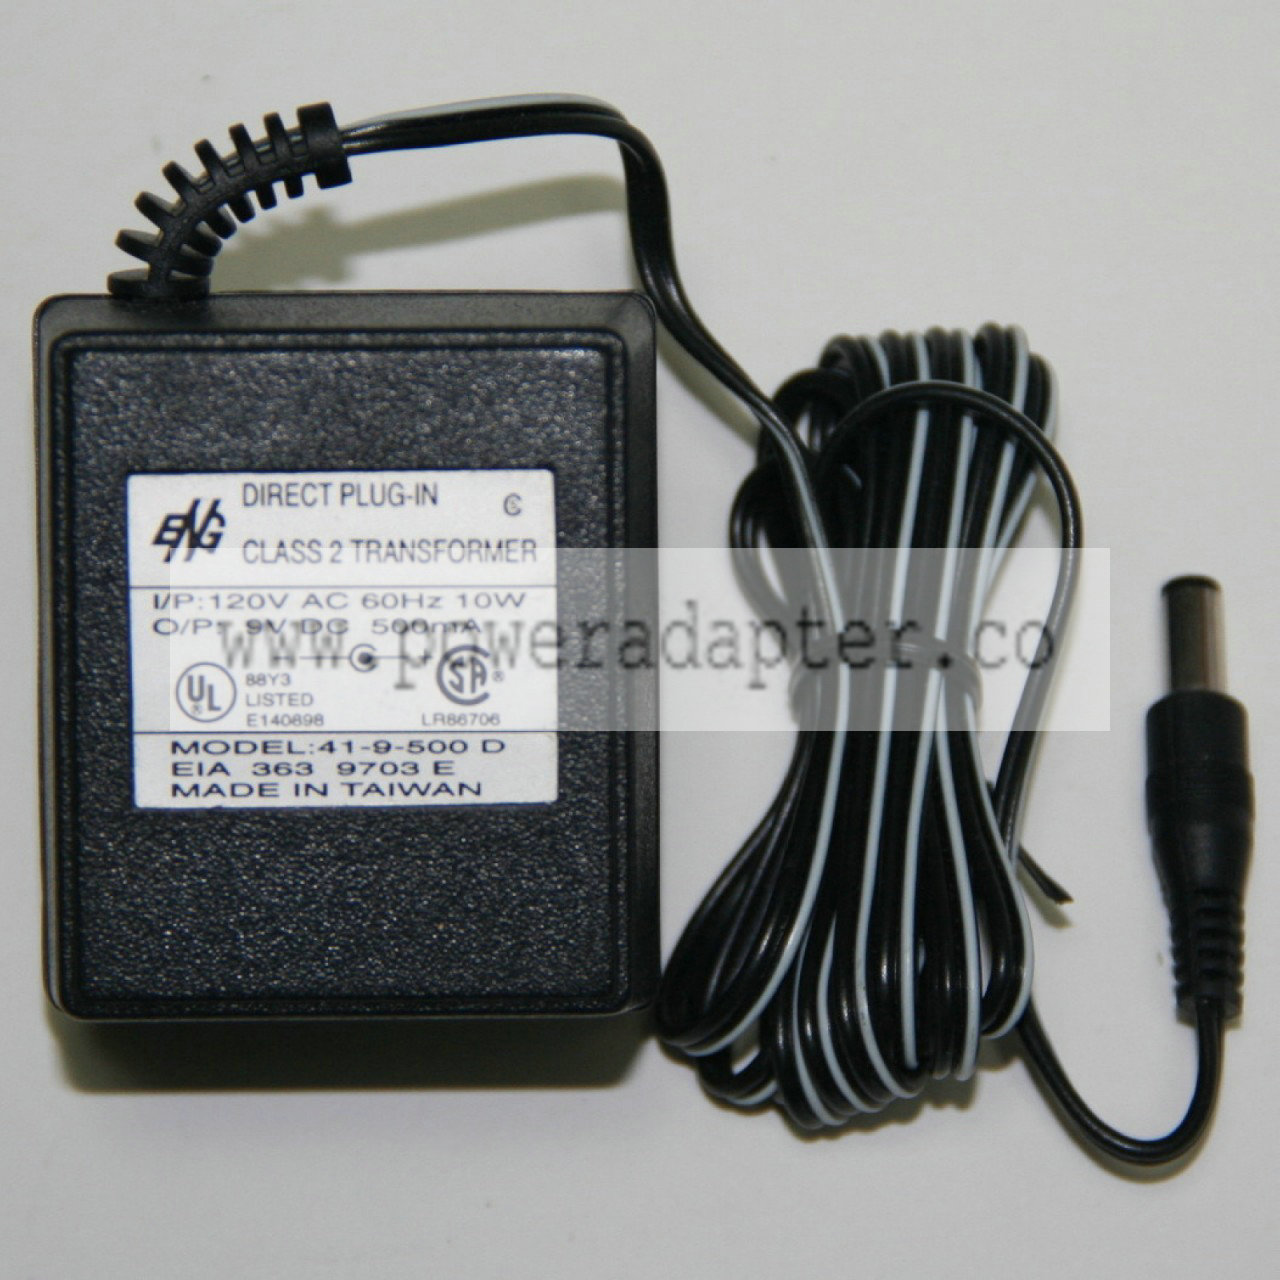 Numark 41-9-500D Power Adapter for some mixers, 9vDC Product Description Numark Power Adapter for some mixers and ot - Click Image to Close